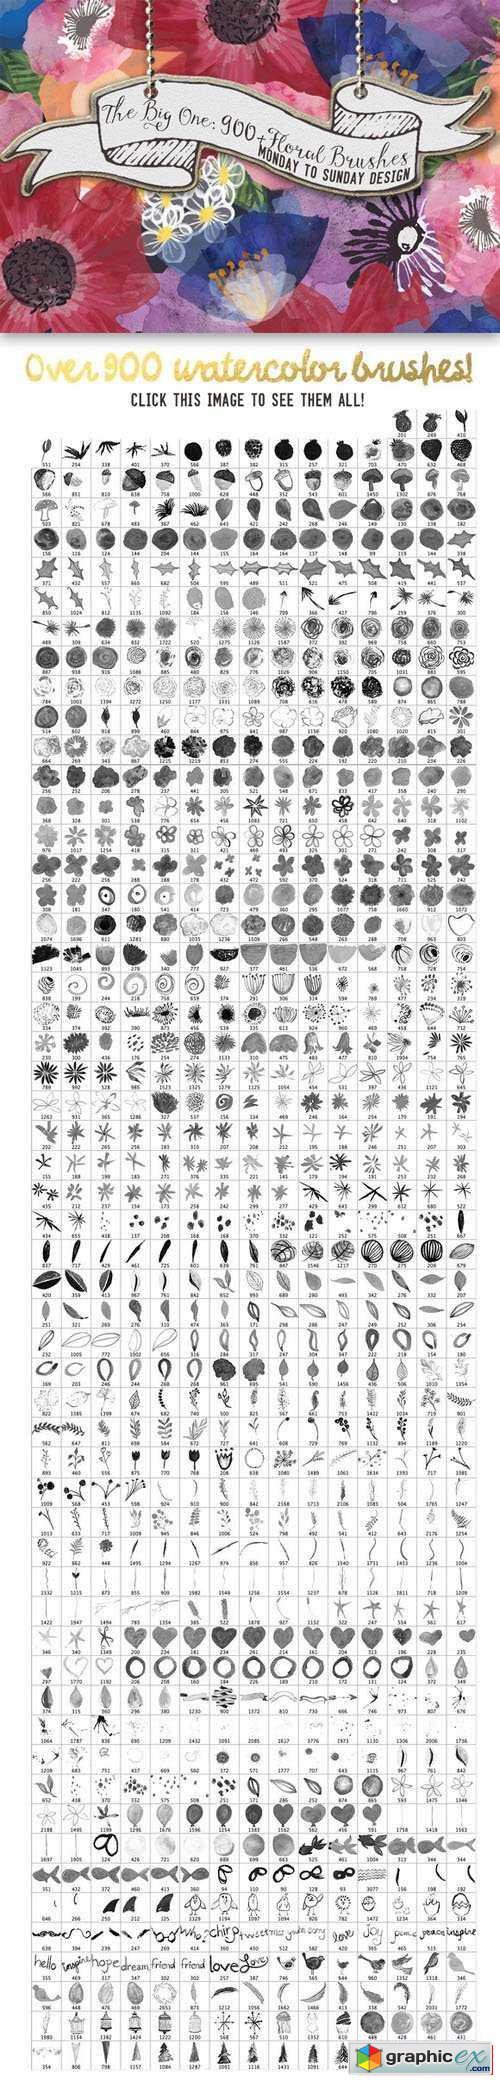 The Big One: 900+ Brushes